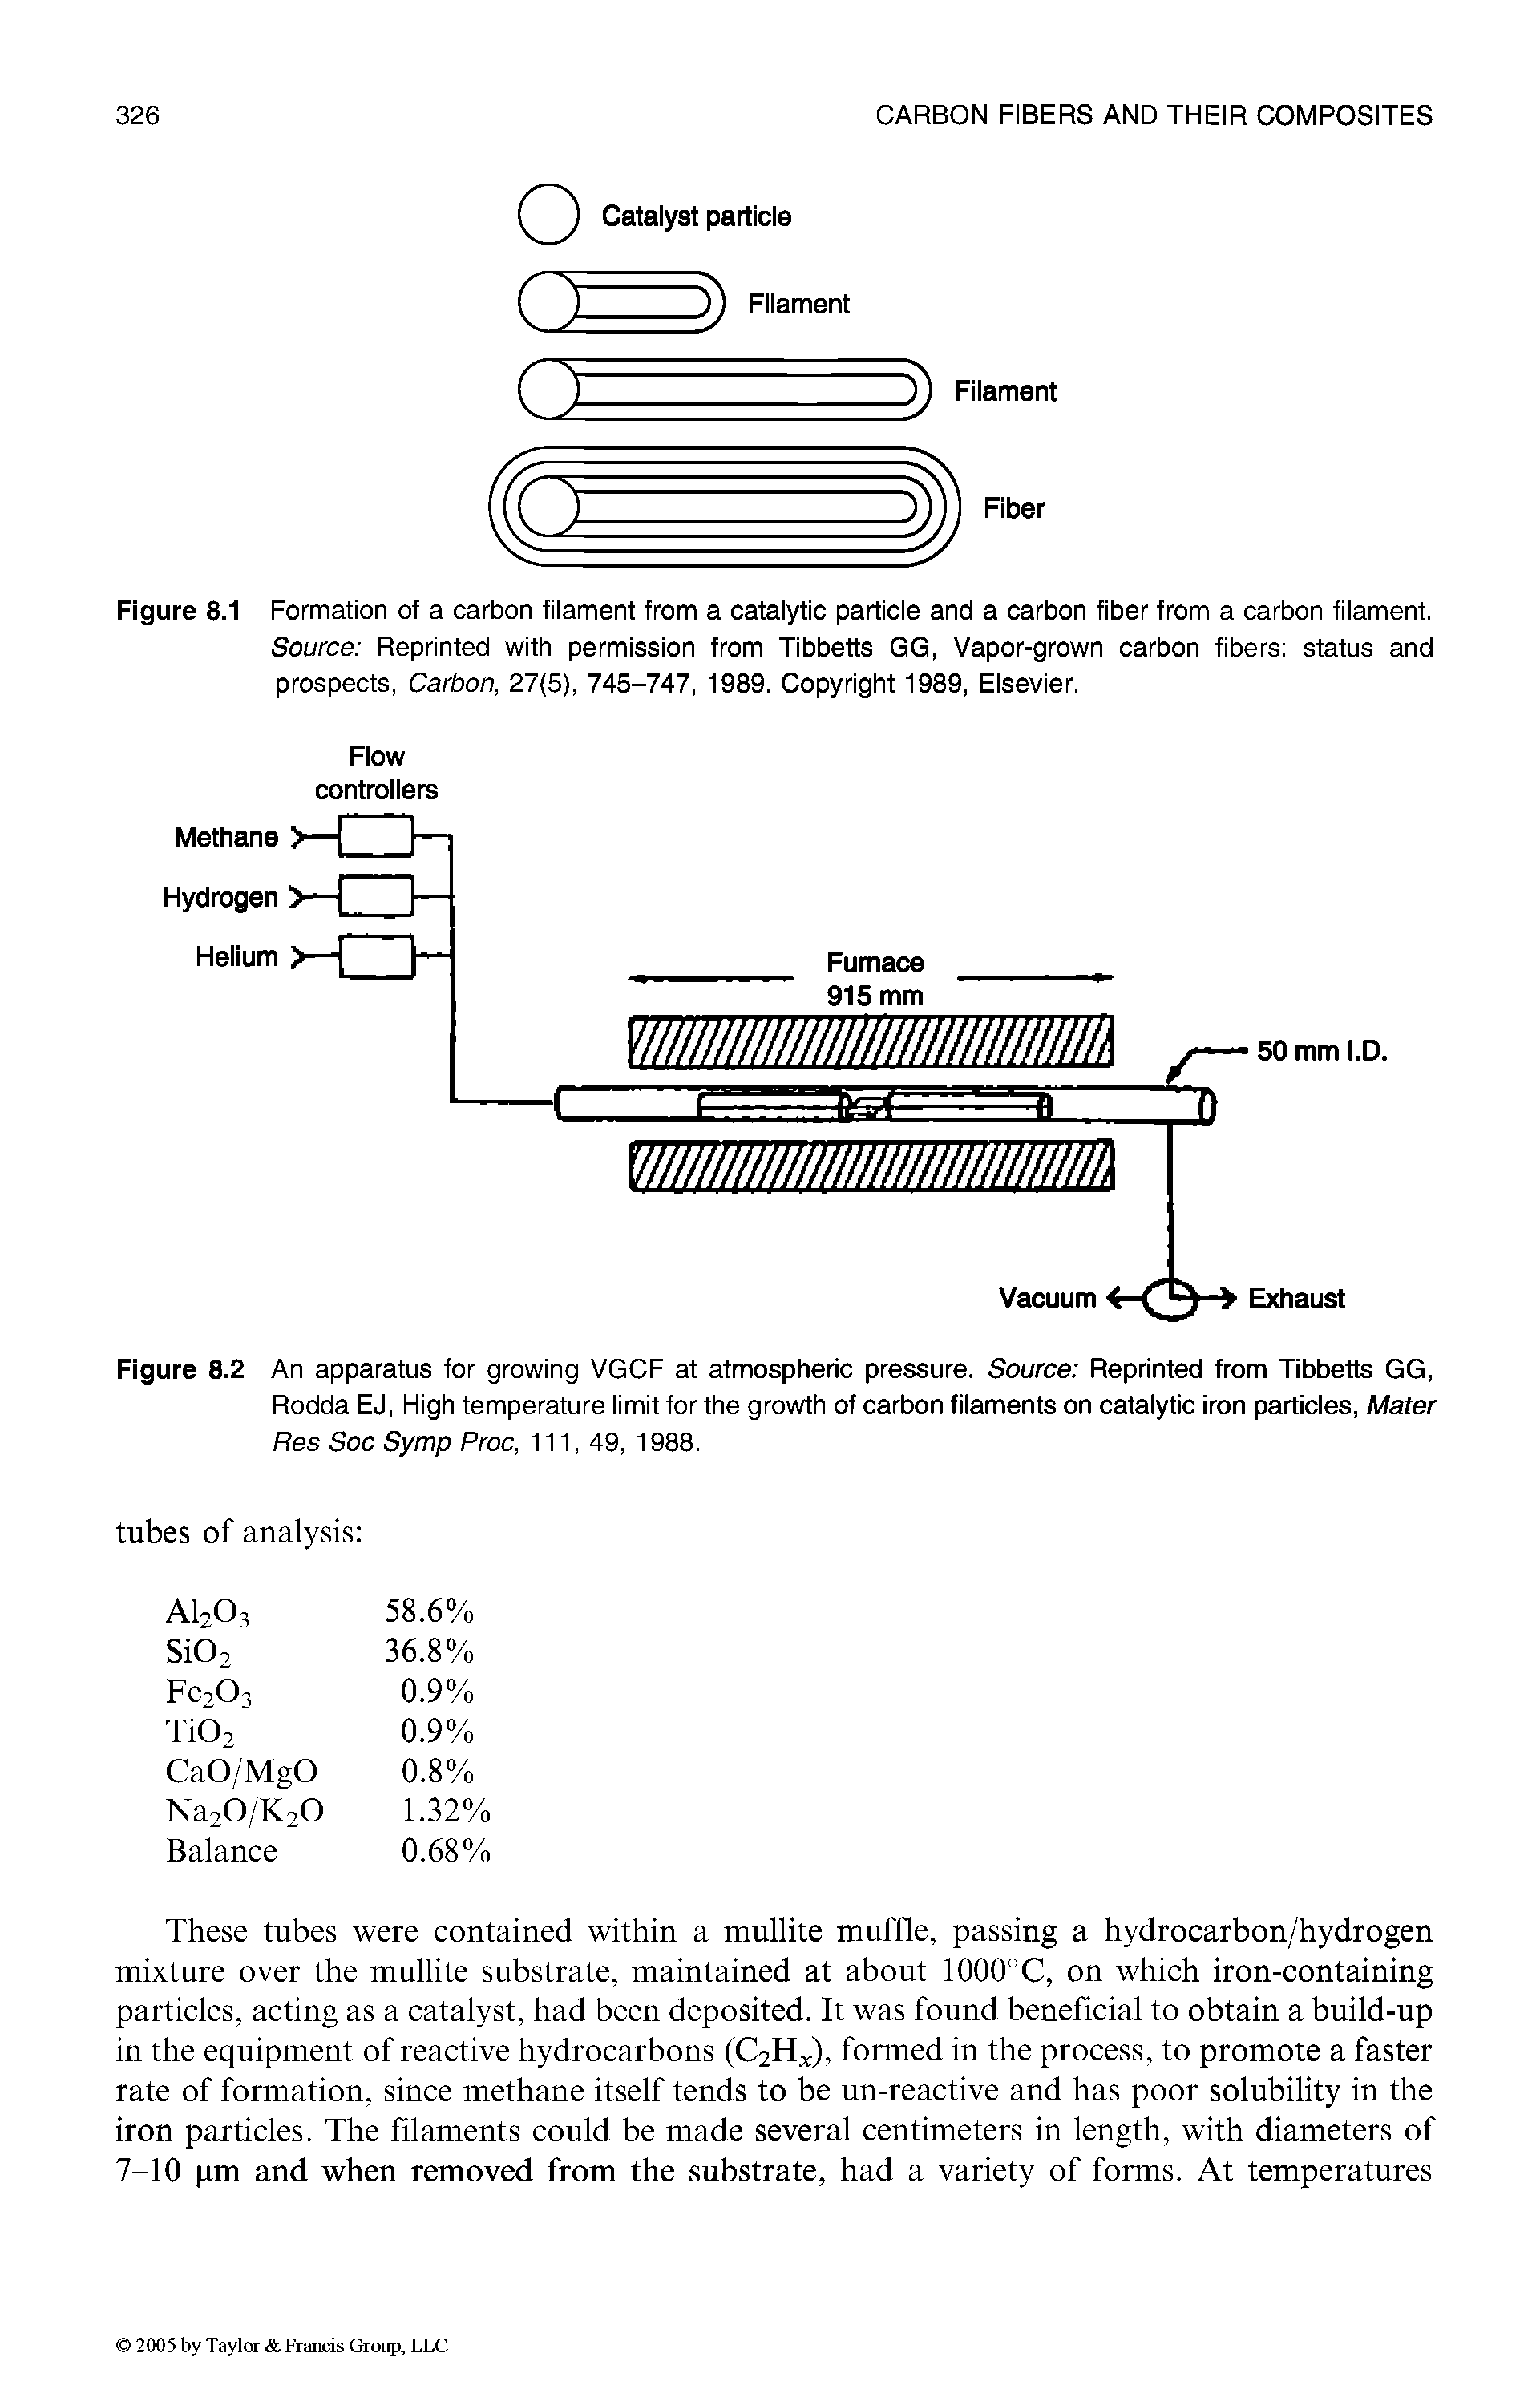 Figure 8.2 An apparatus for growing VGCF at atmospheric pressure. Source Reprinted from Tibbetts GG, Rodda EJ, High temperature limit for the growth of carbon filaments on catalytic iron particles, Mater Res Soc Symp Proc, 111, 49, 1988.